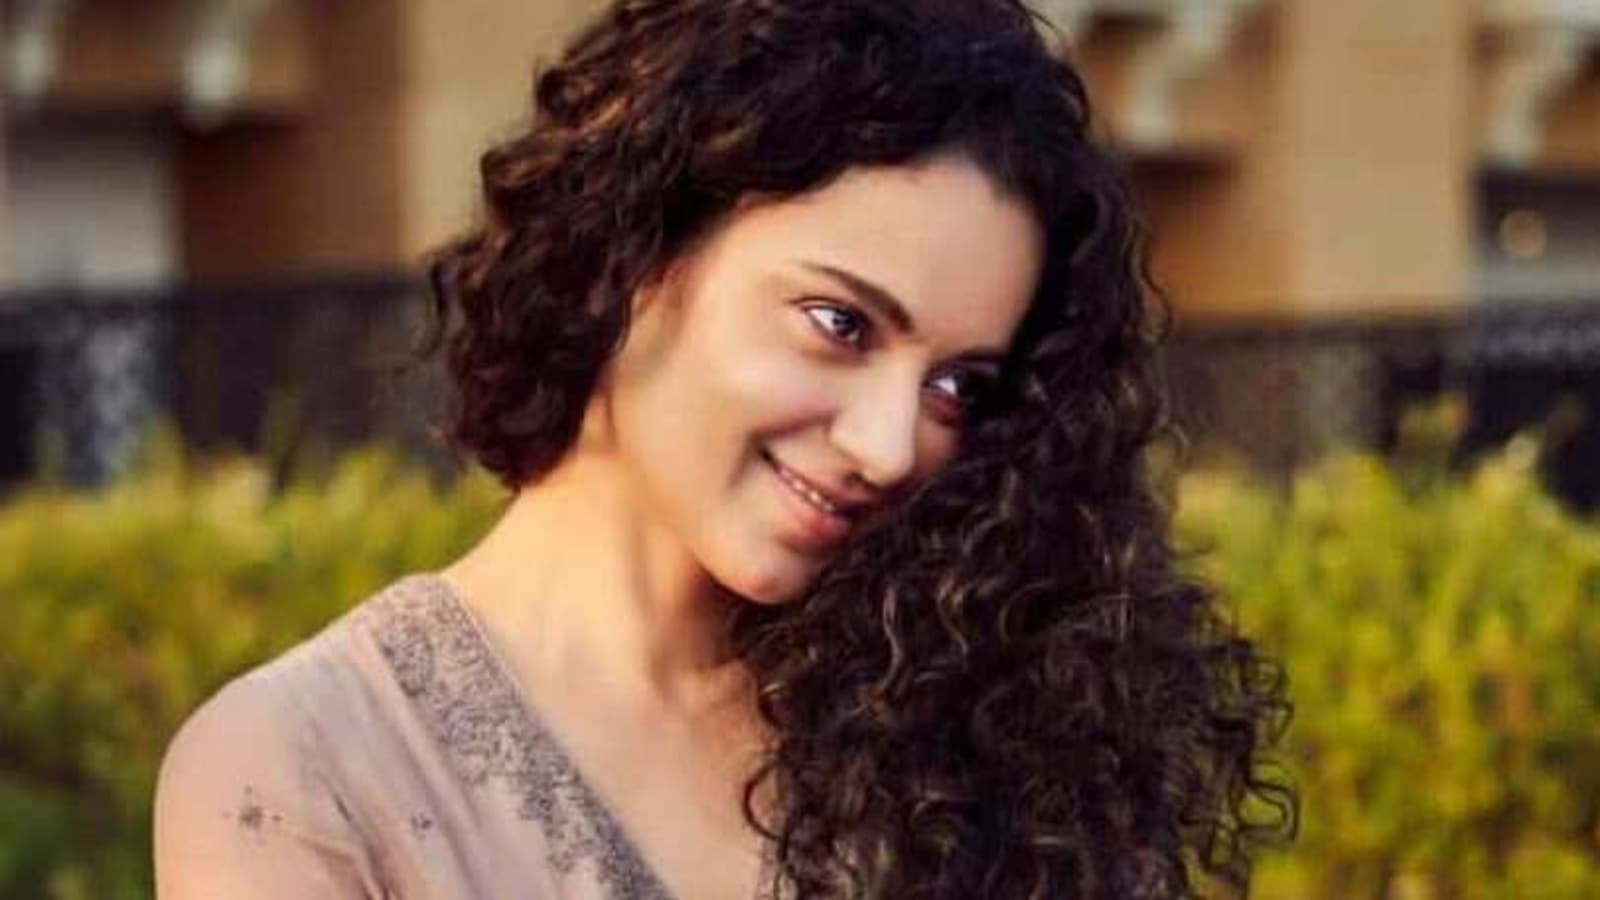 Kangana Ranaut reveals the worst thing about being an actor 'apart from nepotism and movie mafia' | Bollywood - Hindustan Times